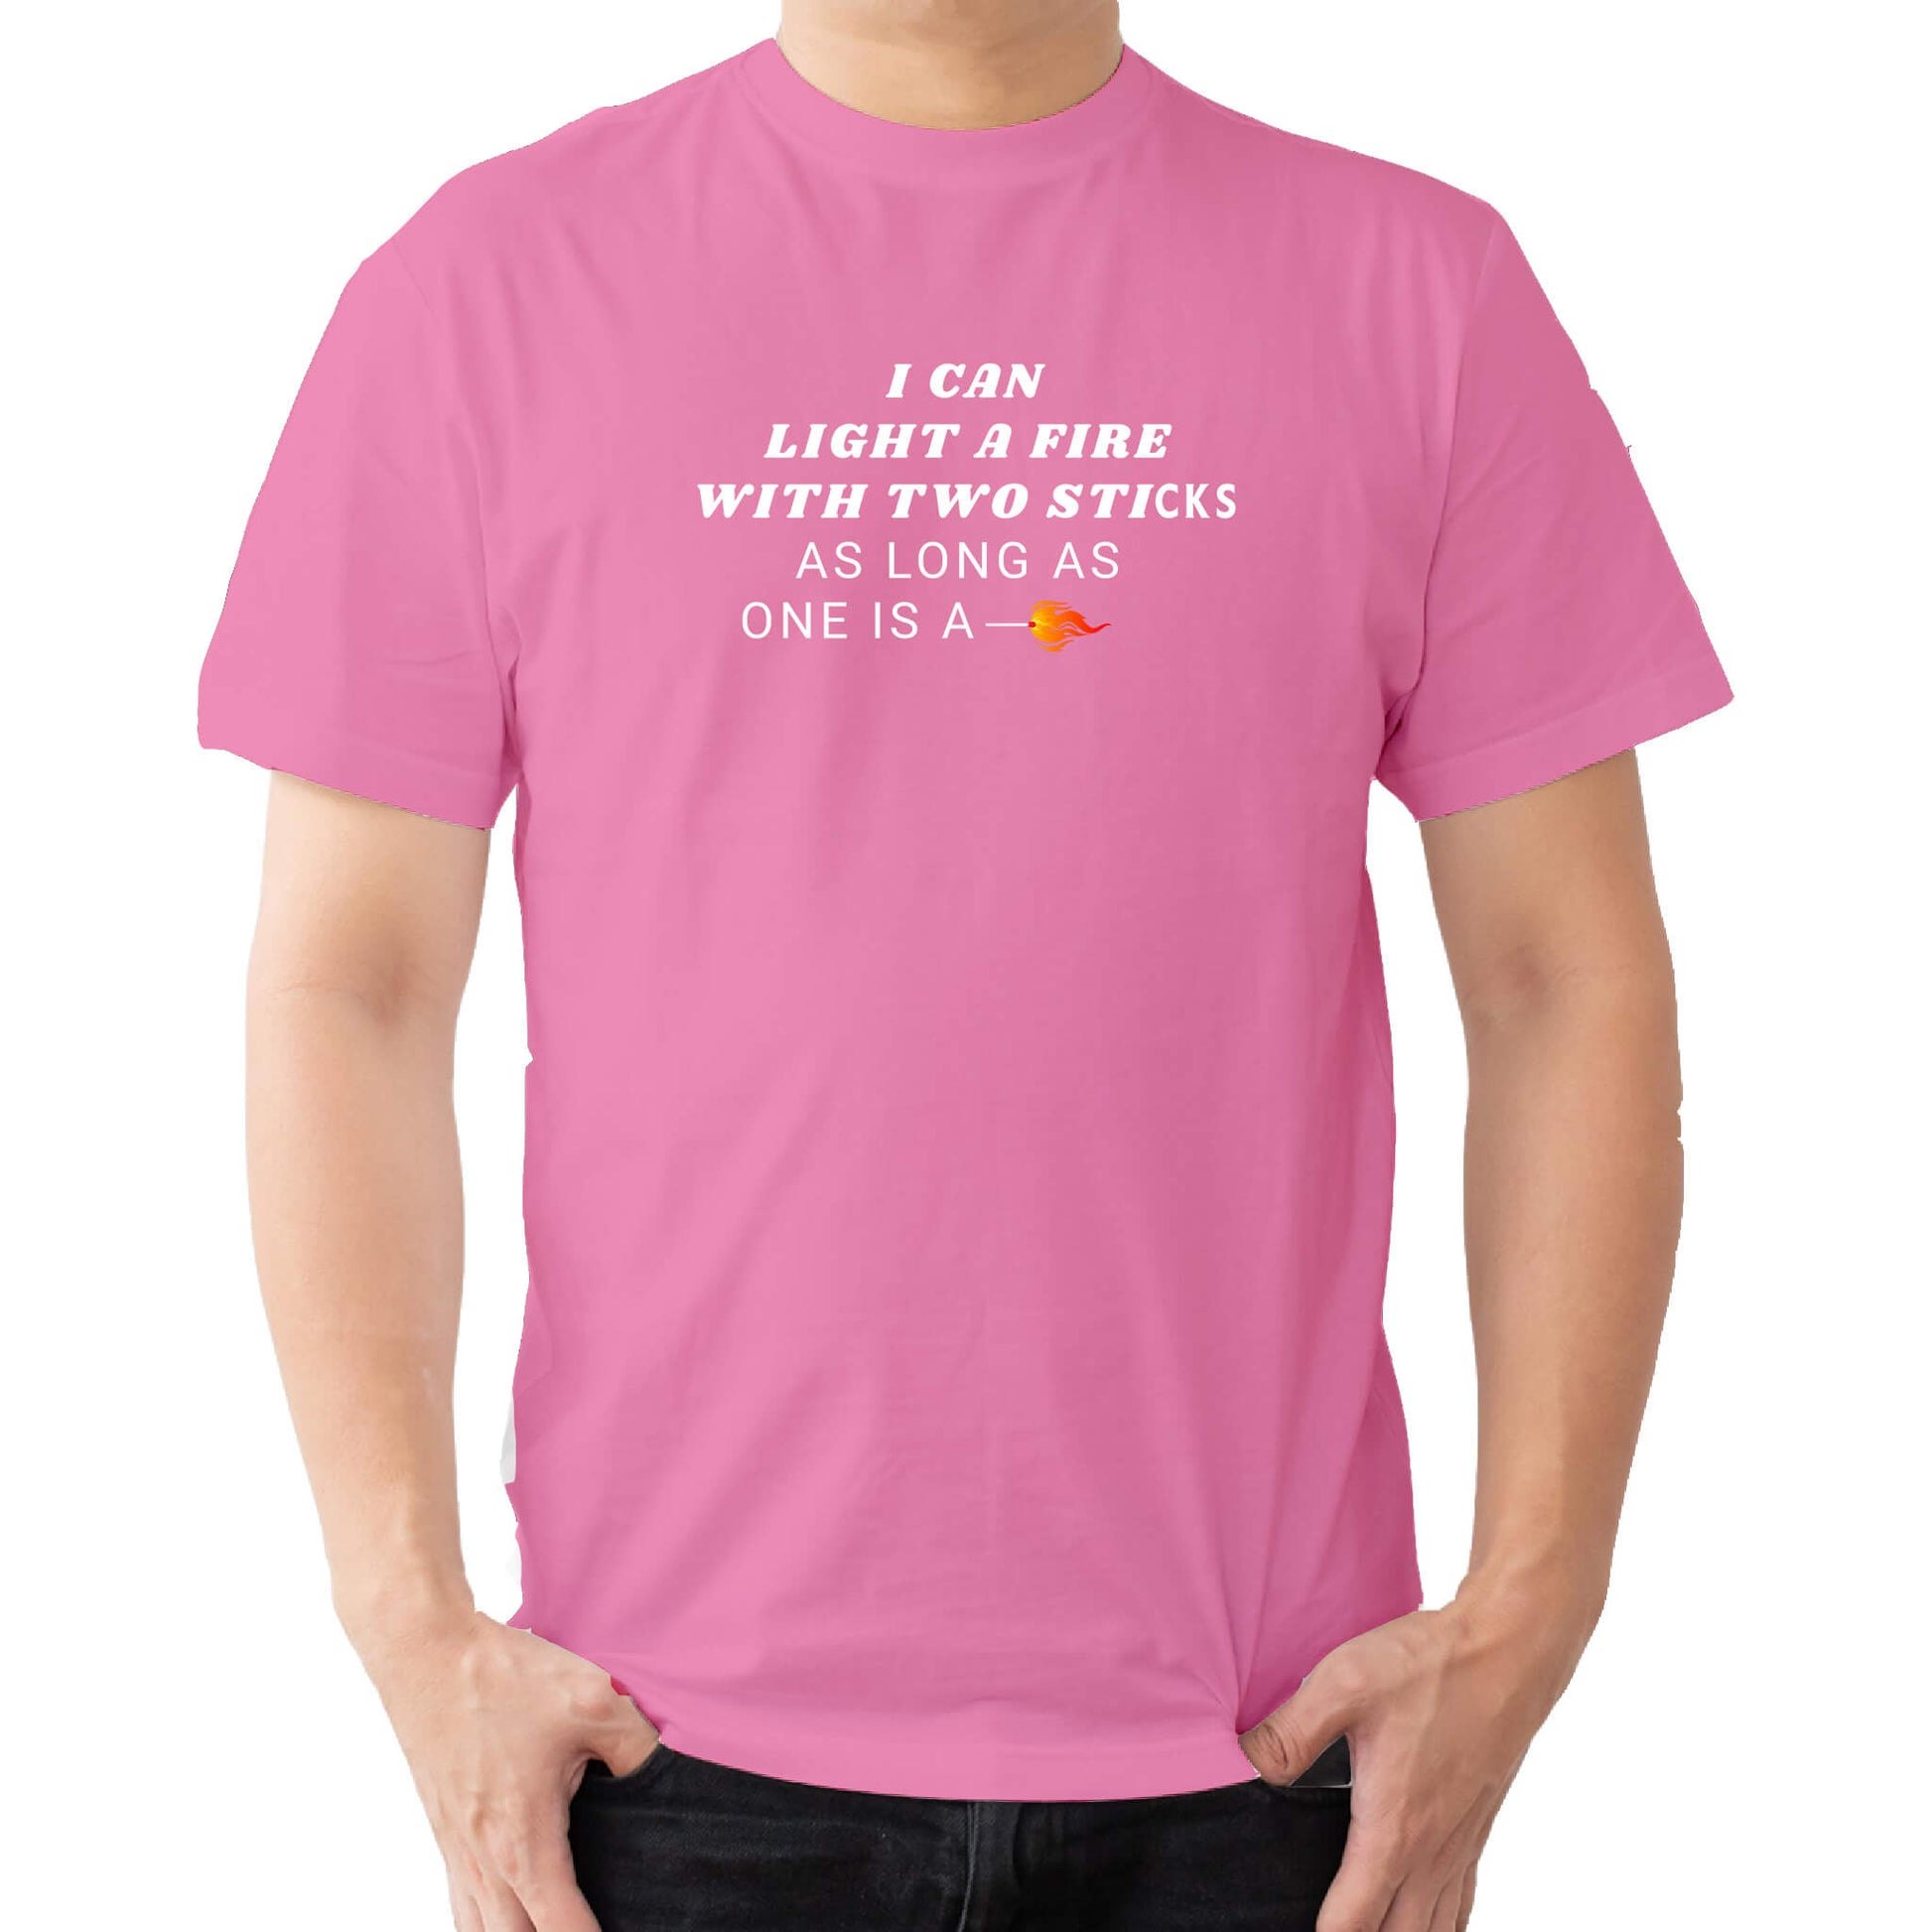 I can light a fire with two sticks t-shirt pink